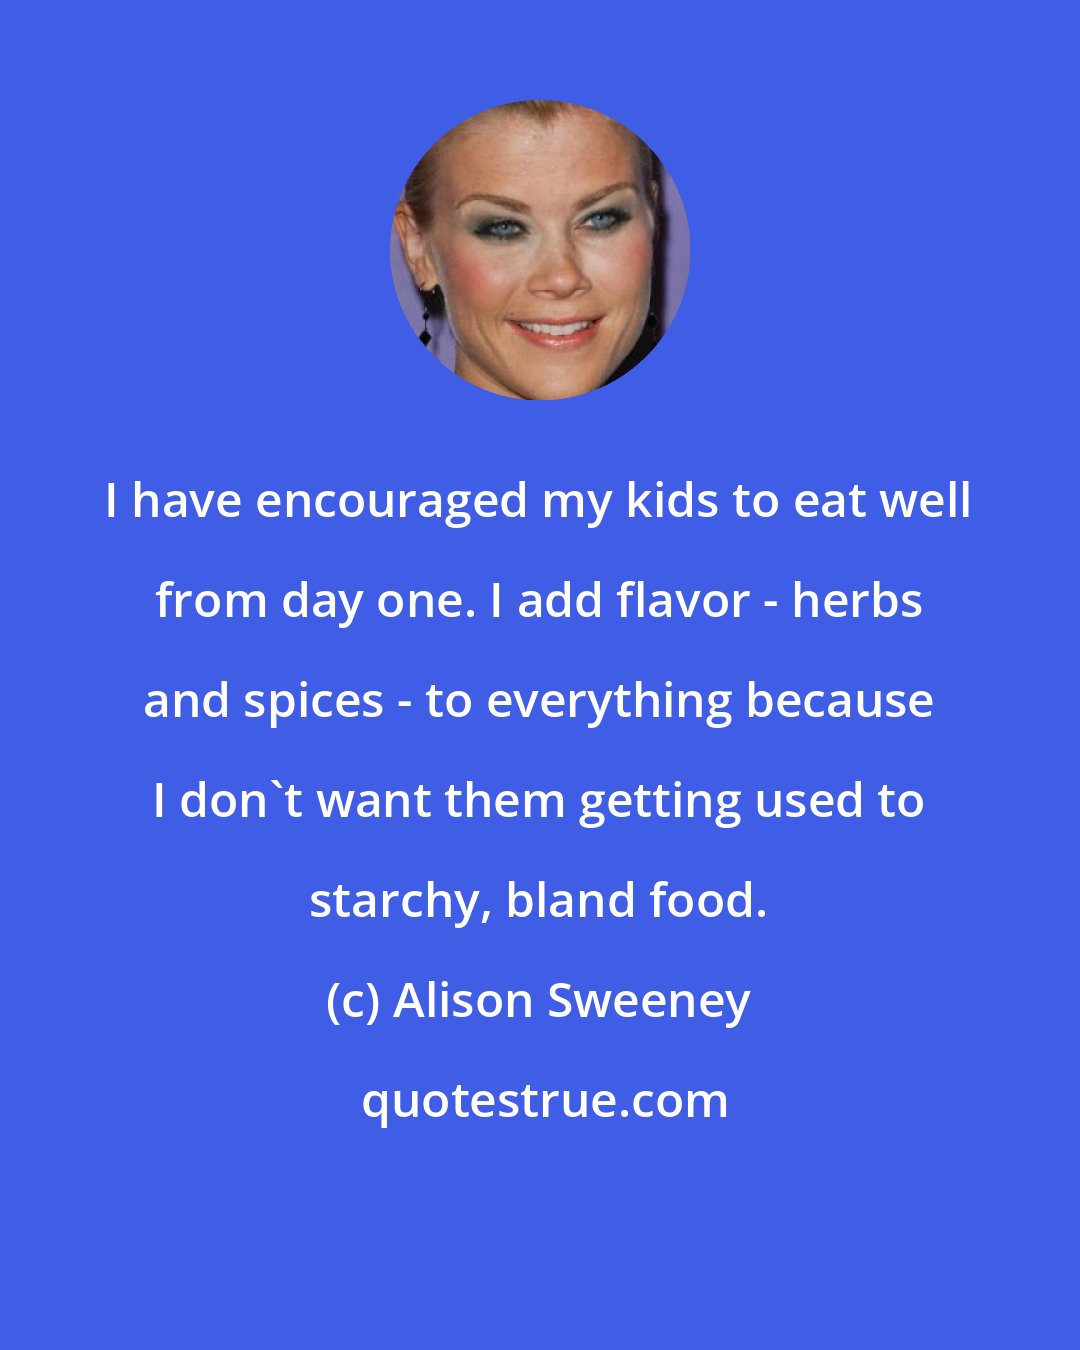 Alison Sweeney: I have encouraged my kids to eat well from day one. I add flavor - herbs and spices - to everything because I don't want them getting used to starchy, bland food.